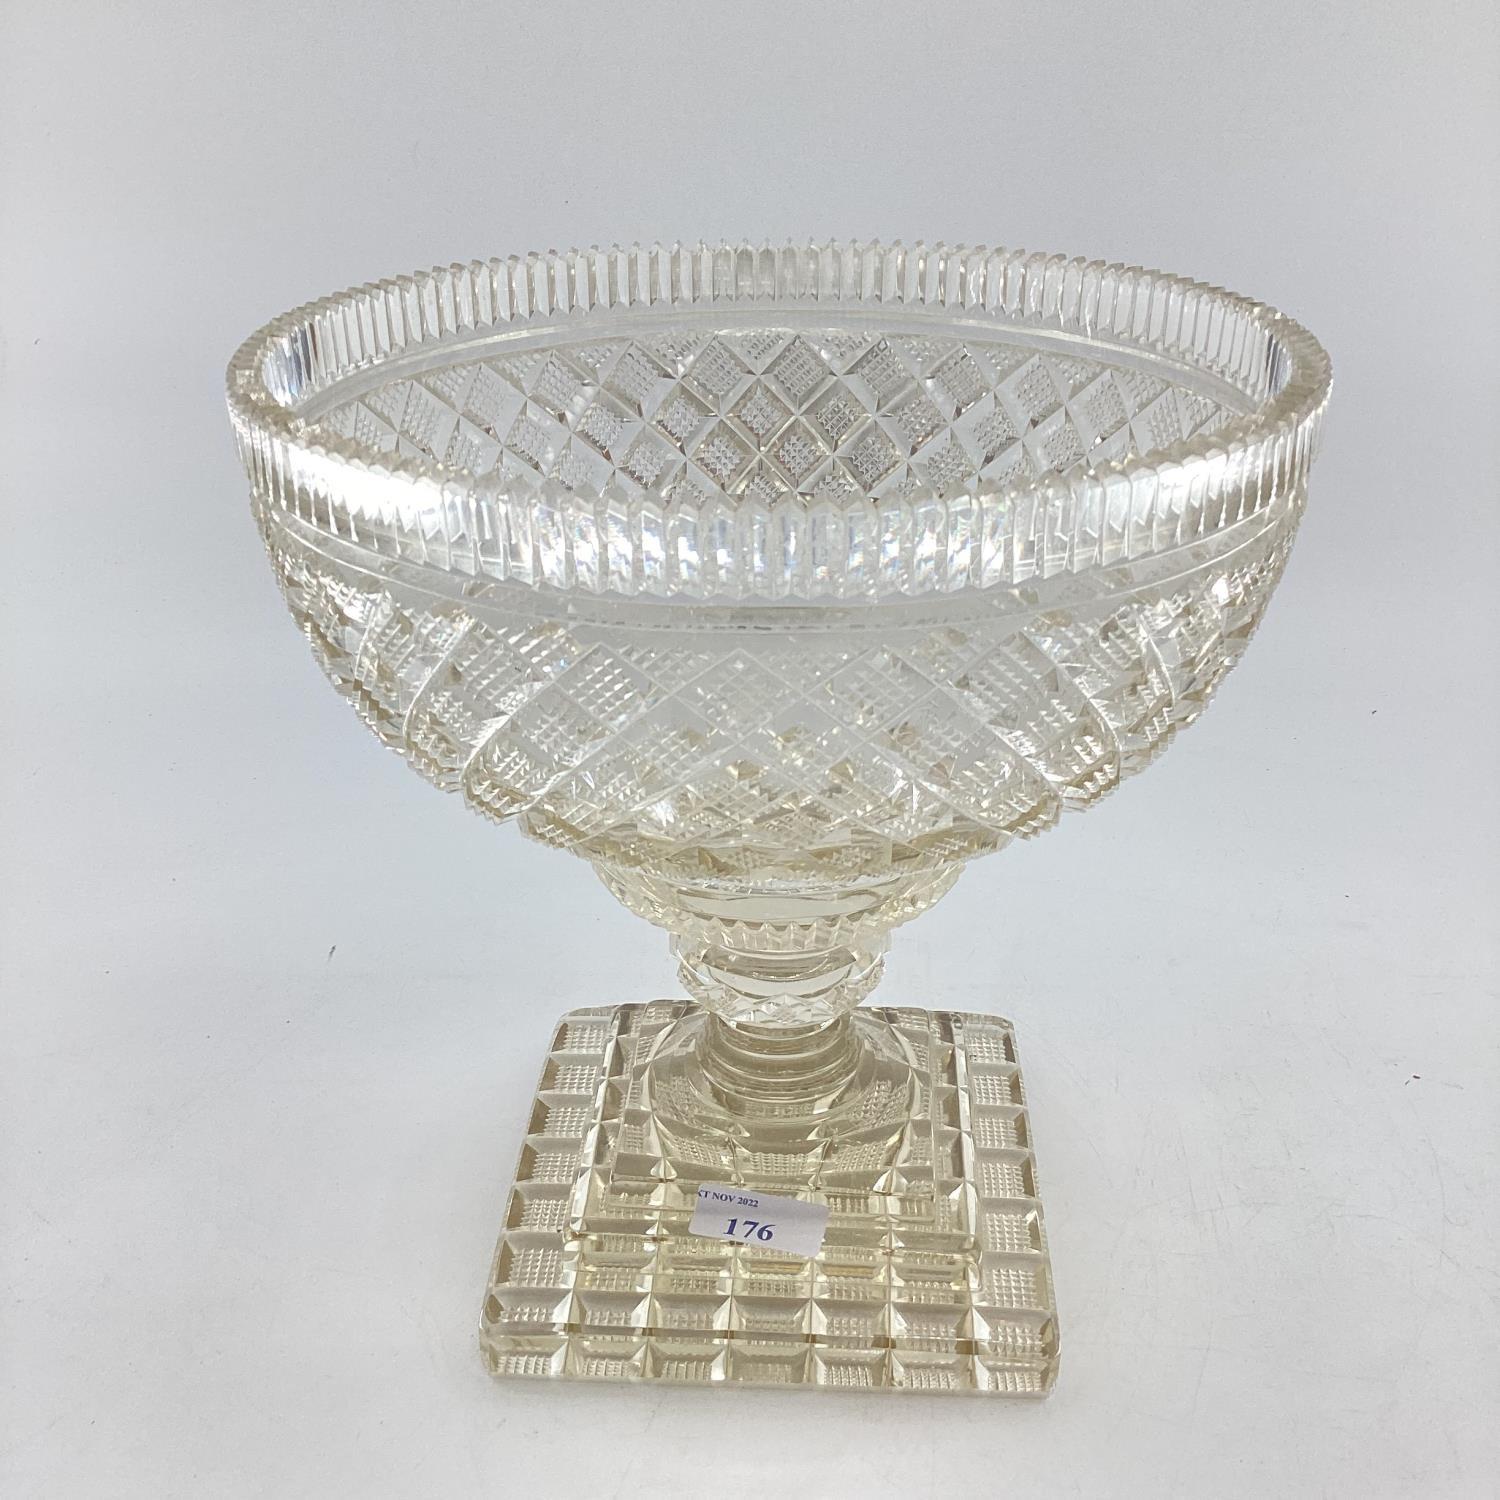 C20th heavy cut glass fruit bowl standing on stepped foot